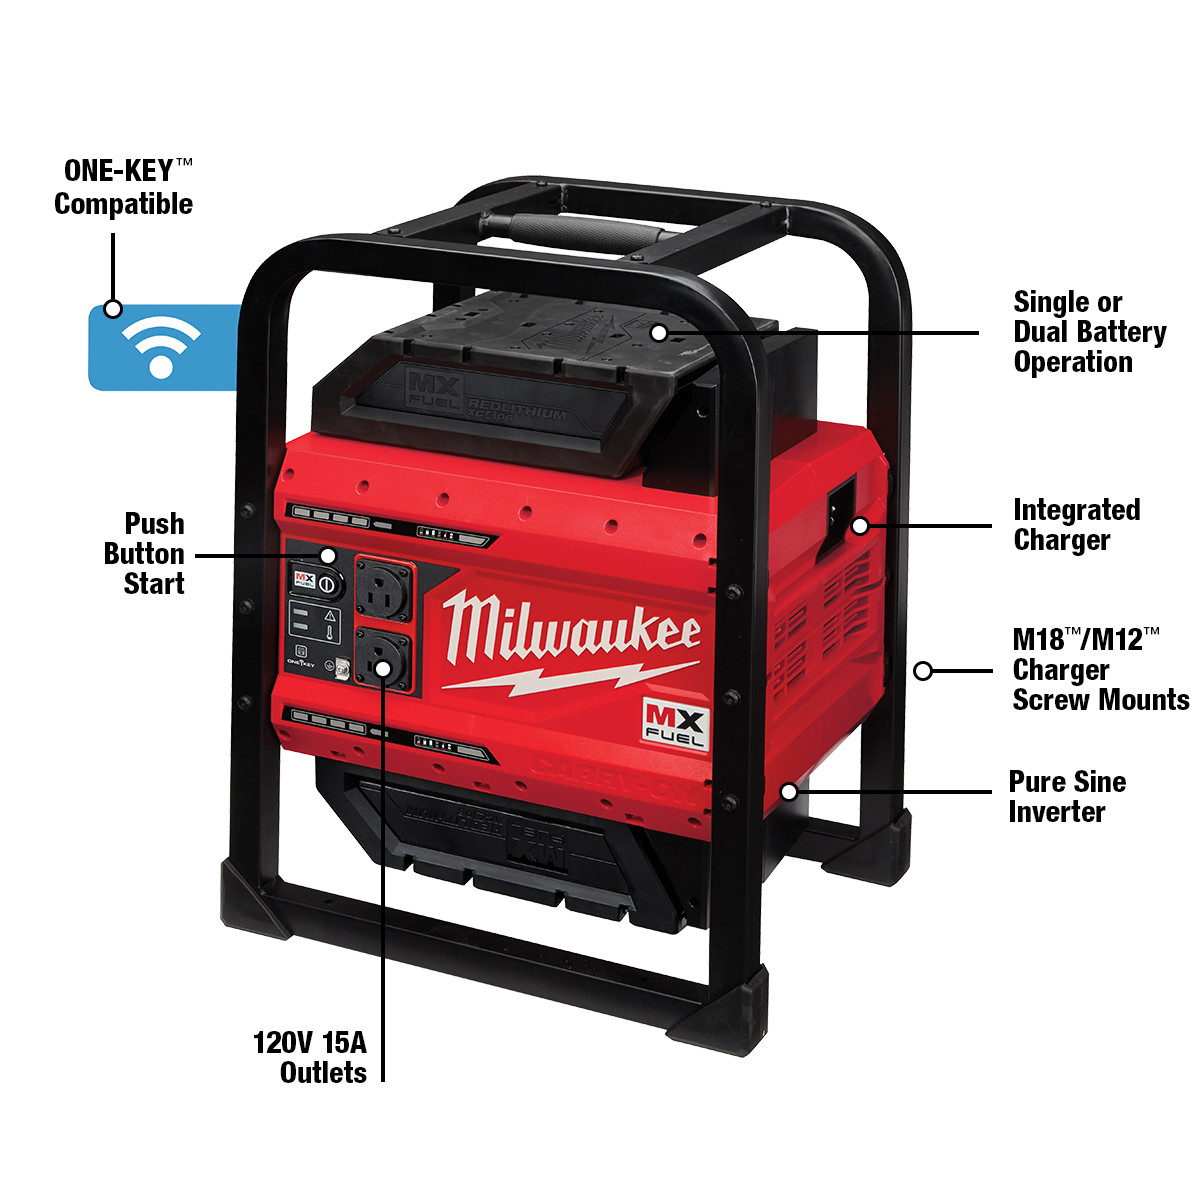 Milwaukee MX FUEL 3600/1800 Watt Carry-On Power Supply Features: One-Key Compatible, Single or Dual Battery Operation, Integrated Charger, M18/M12 Charger Screw Mounts, Pure Sine Inverter, 120V 15A Outlets, Push Button Start